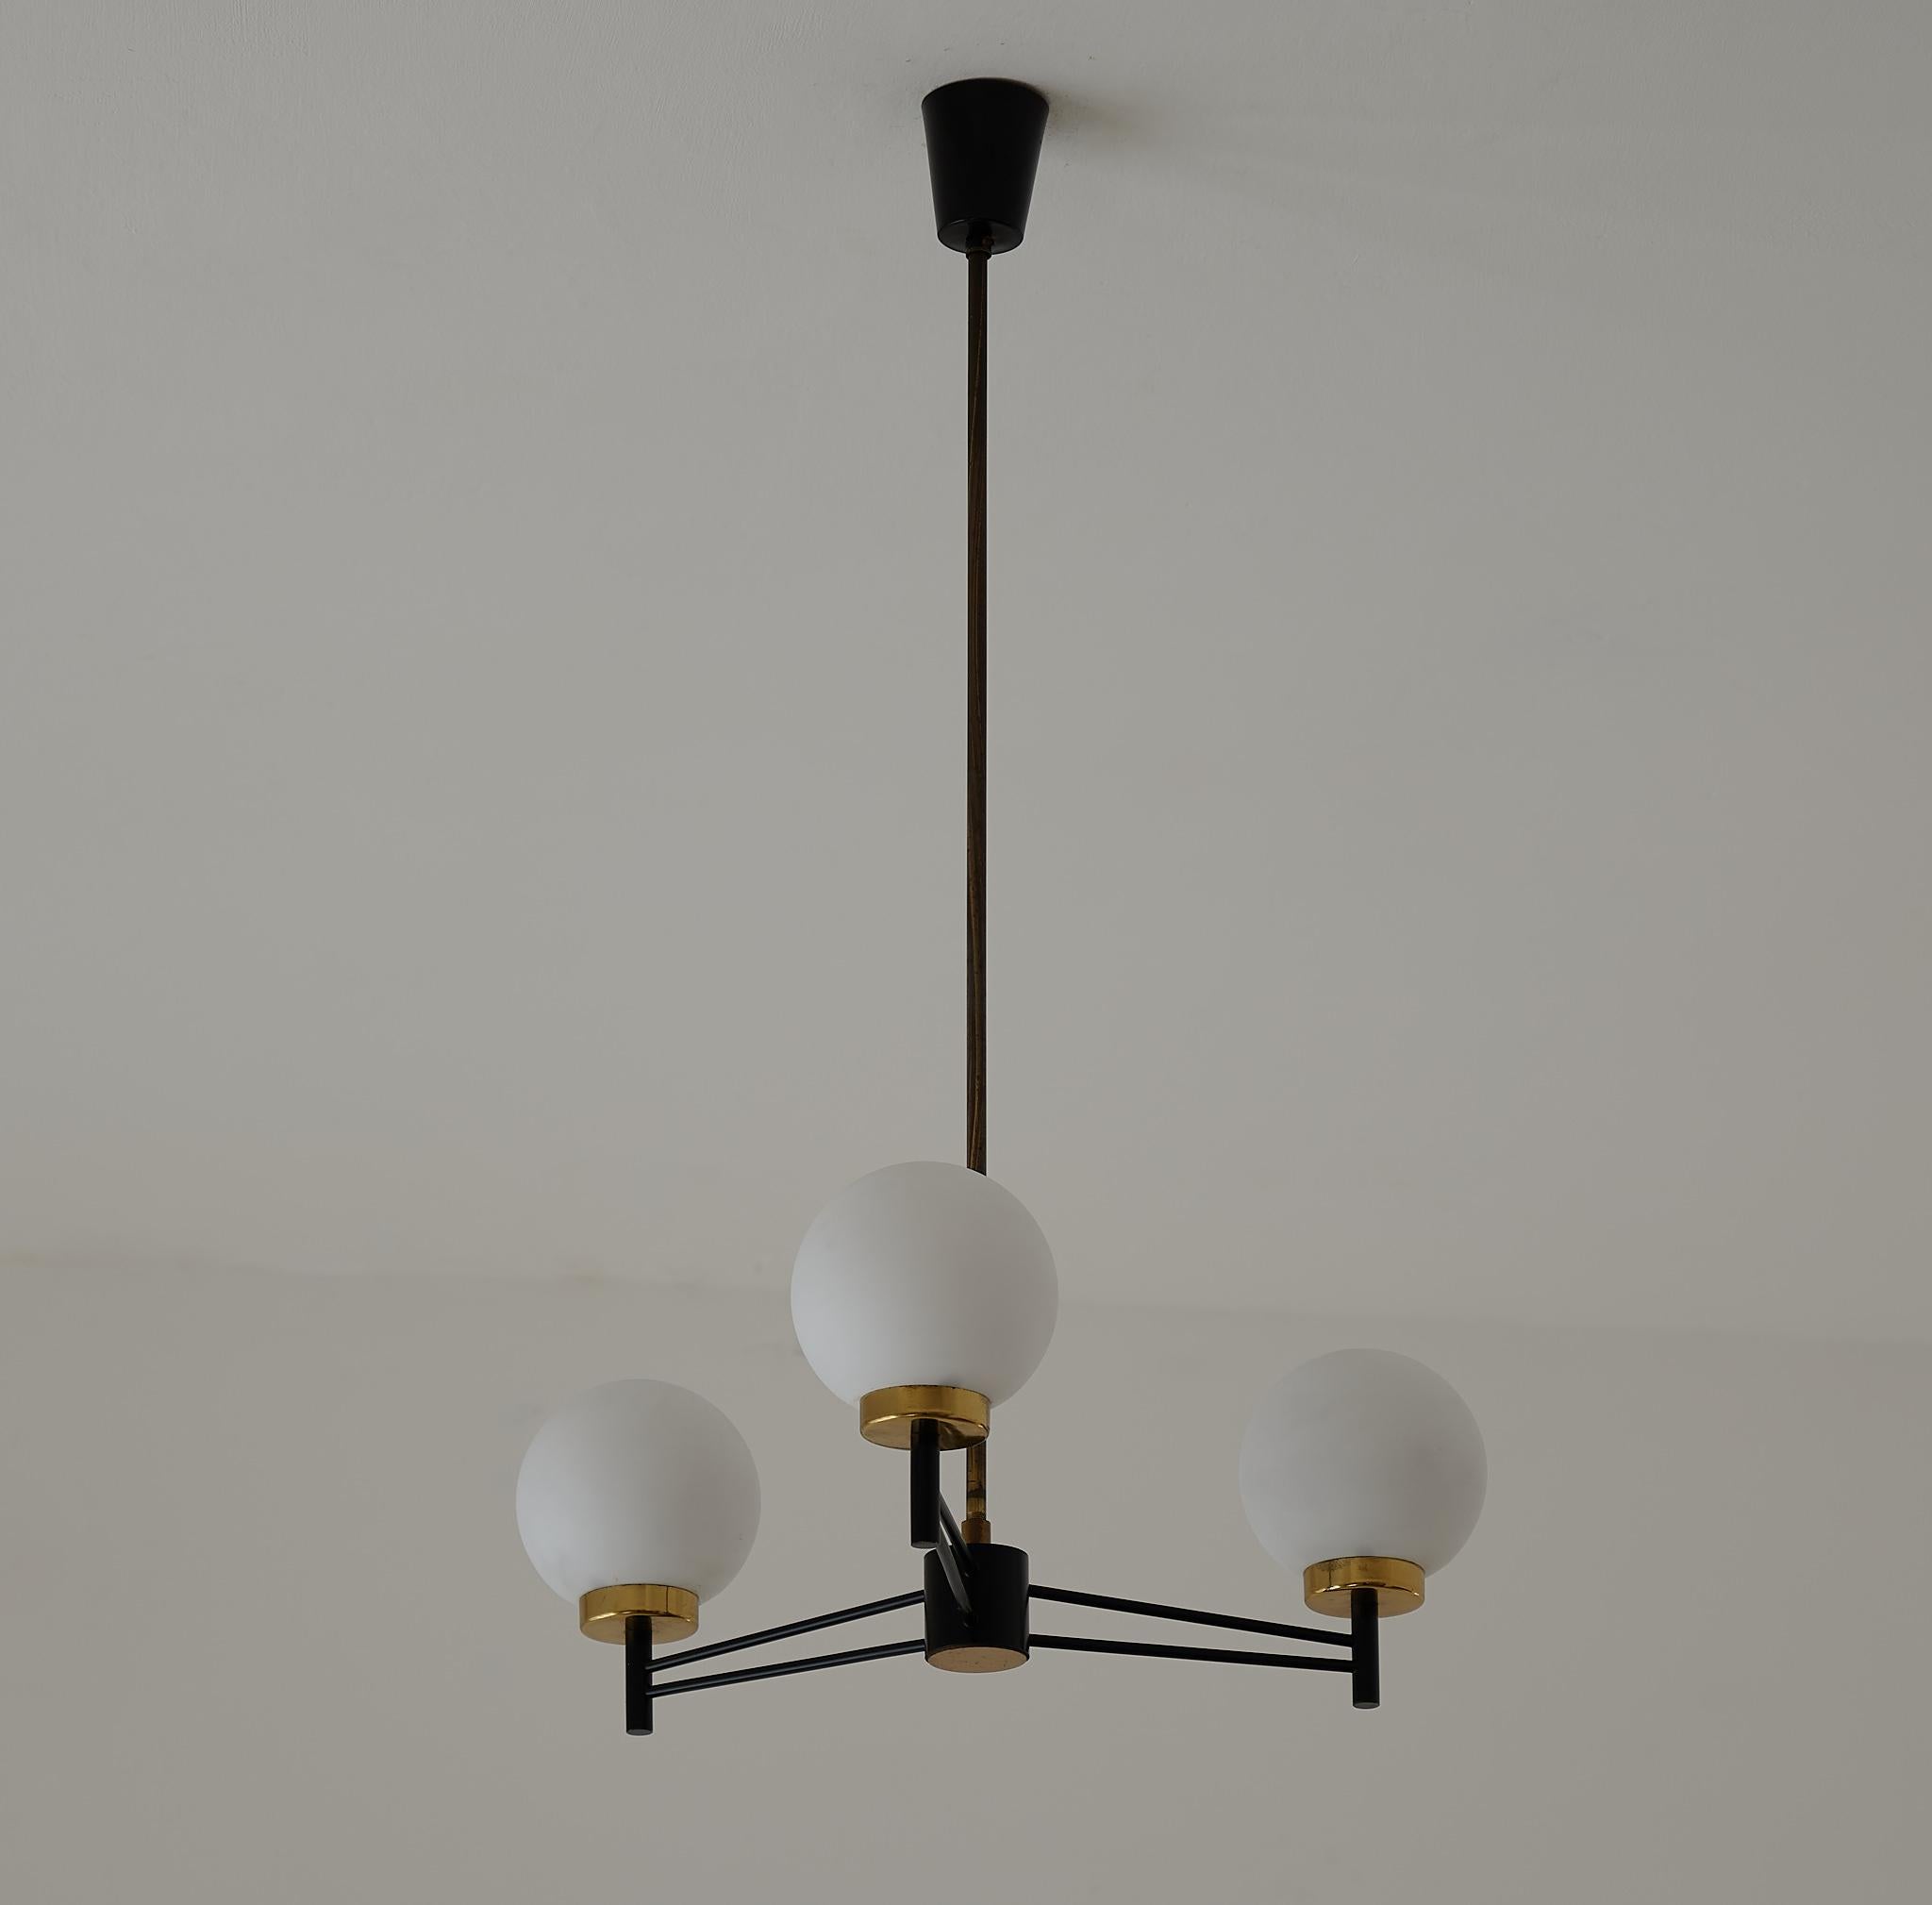 Italian pendant chandelier with three arms, made with black enameled iron, brass and 3 opaline glass globes .


Elegant and modern design , typical of Italian lamps of the 1950s

3 standard E14 bulbs.